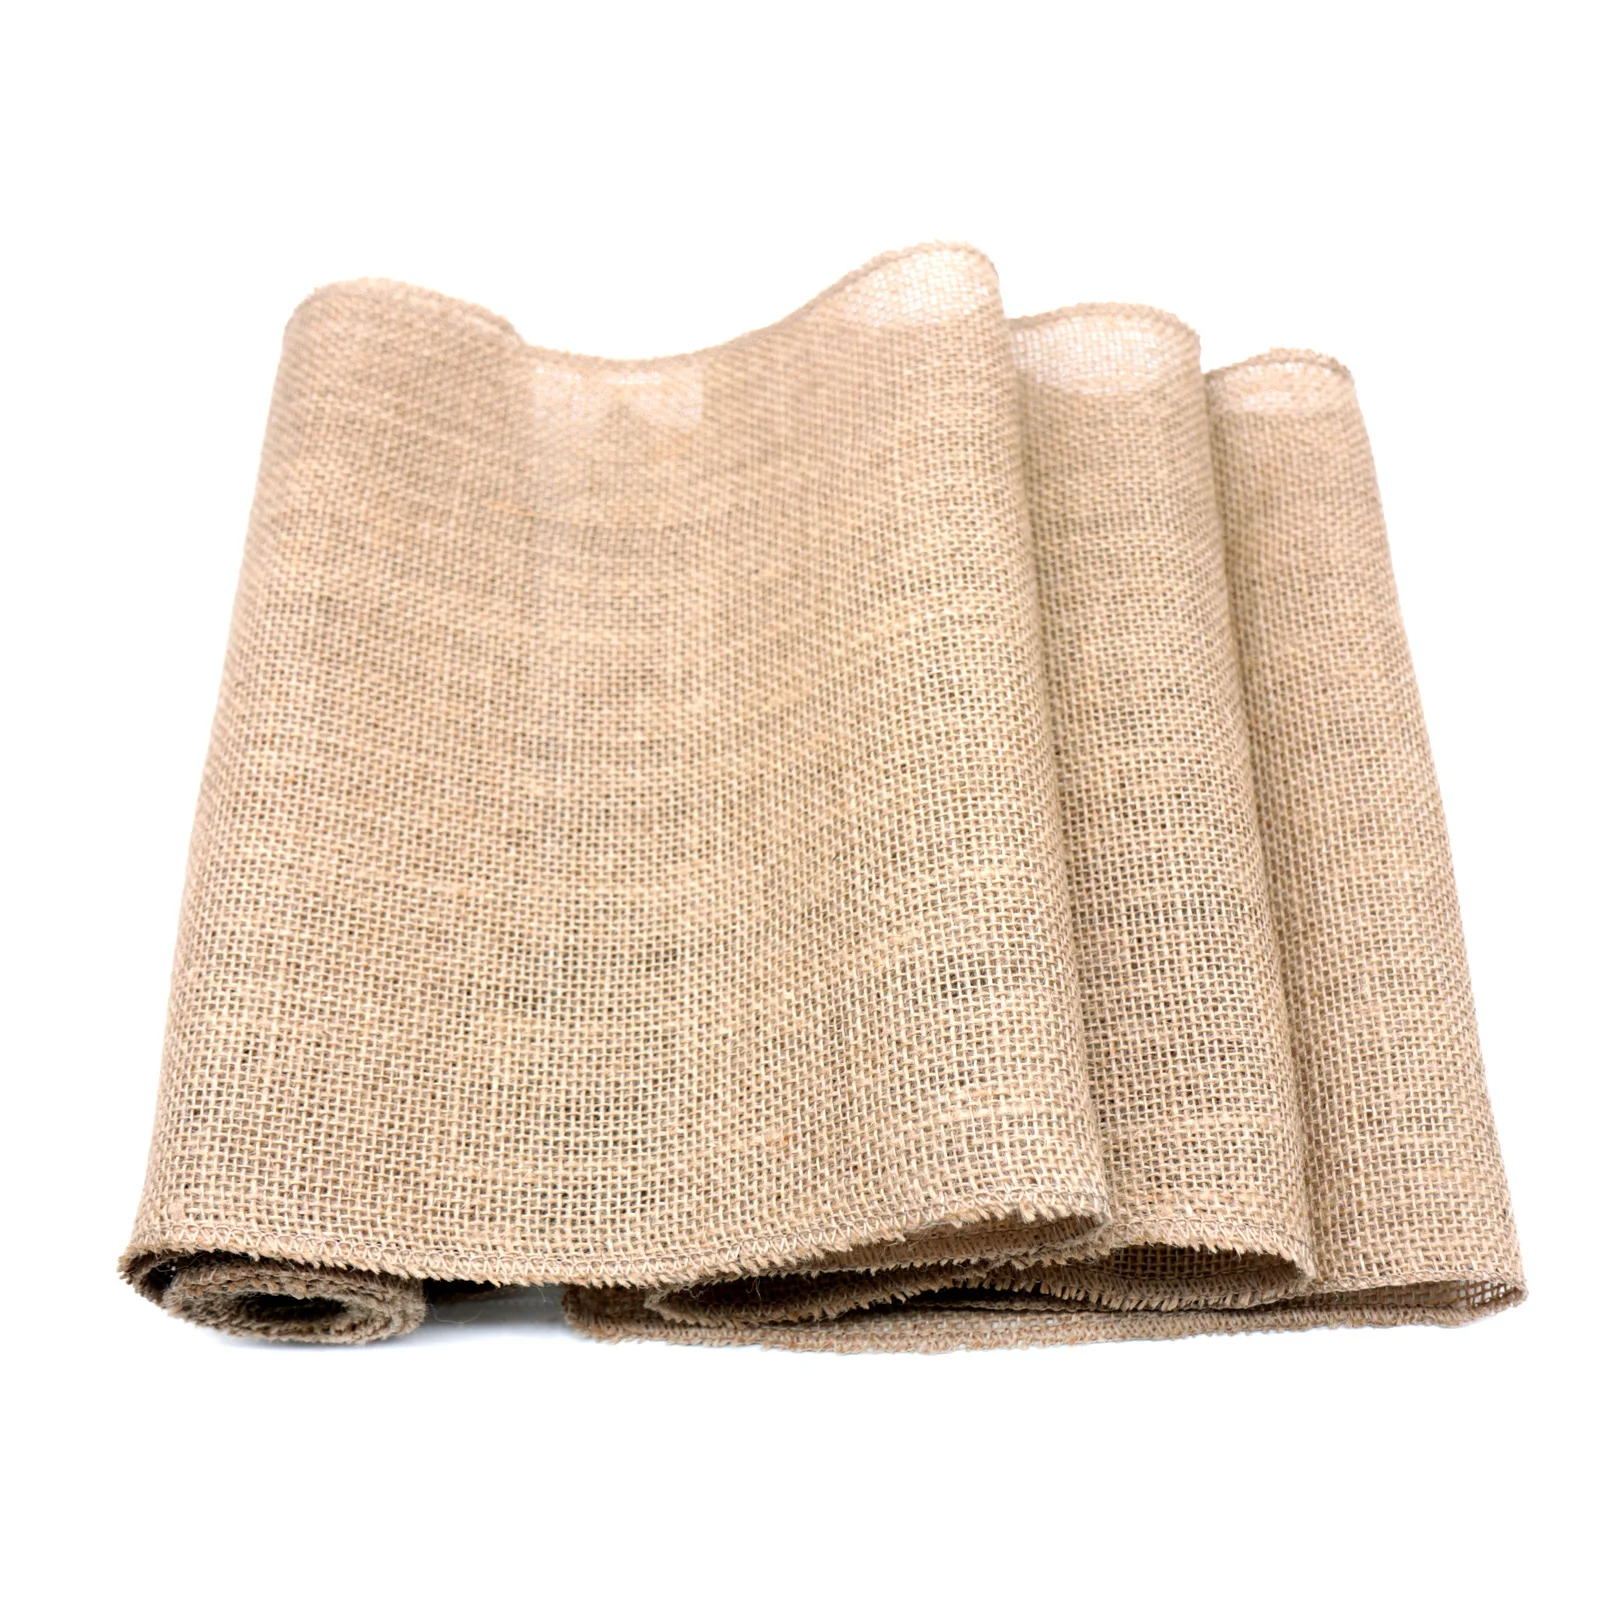 Vintage Burlap Hessian Table Runner Natural Jute Country Wedding Party Decoration home textiles For Christmas Home Table Runners